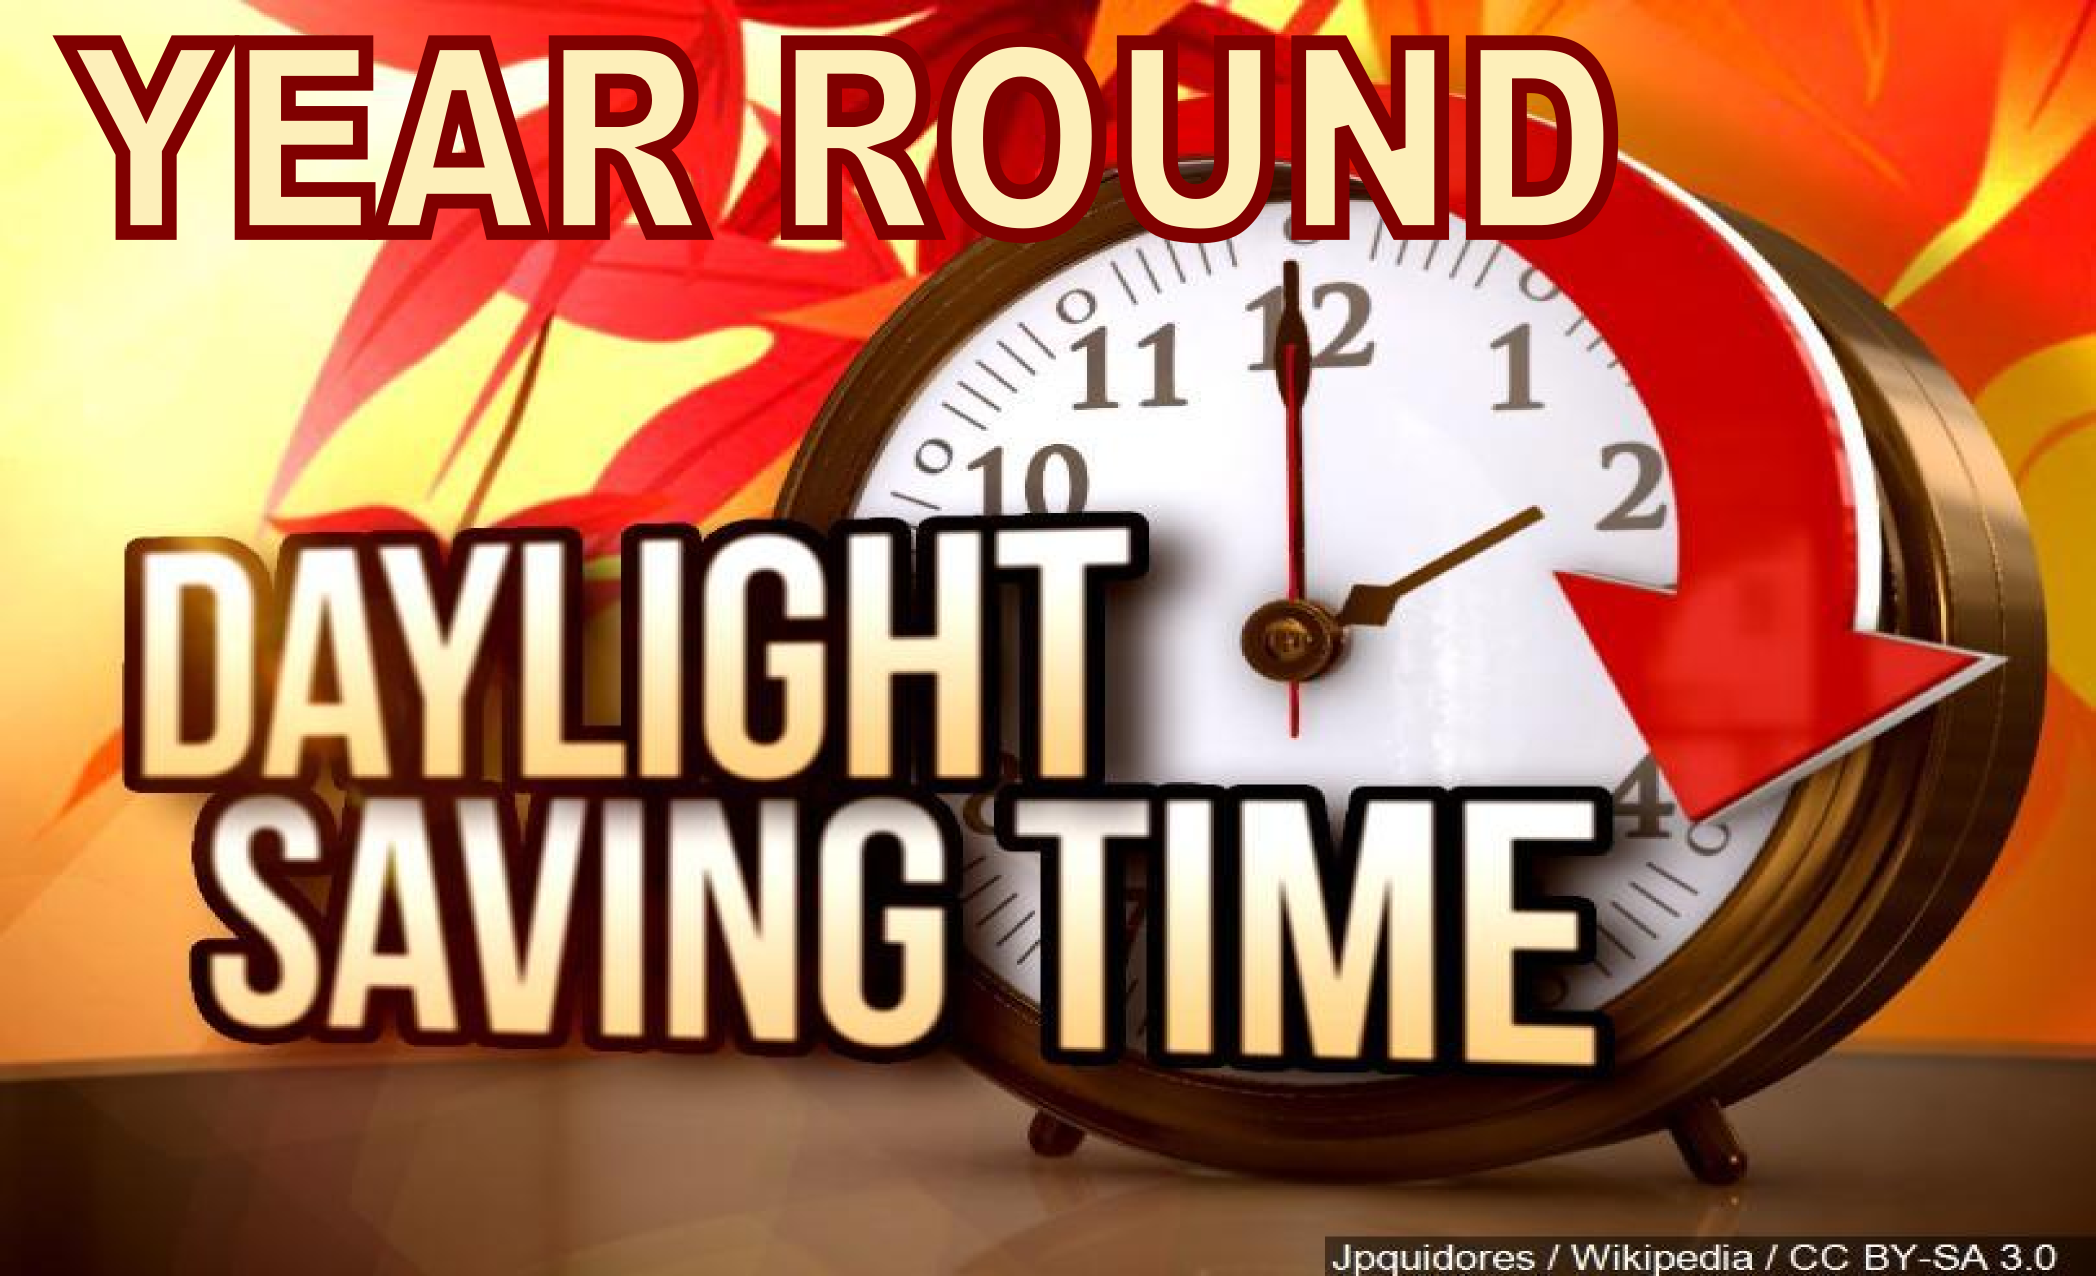 PERMANENT DAYLIGHT SAVING TIME PASSES IN TENNESSEE, HEADS TO GOVERNORS